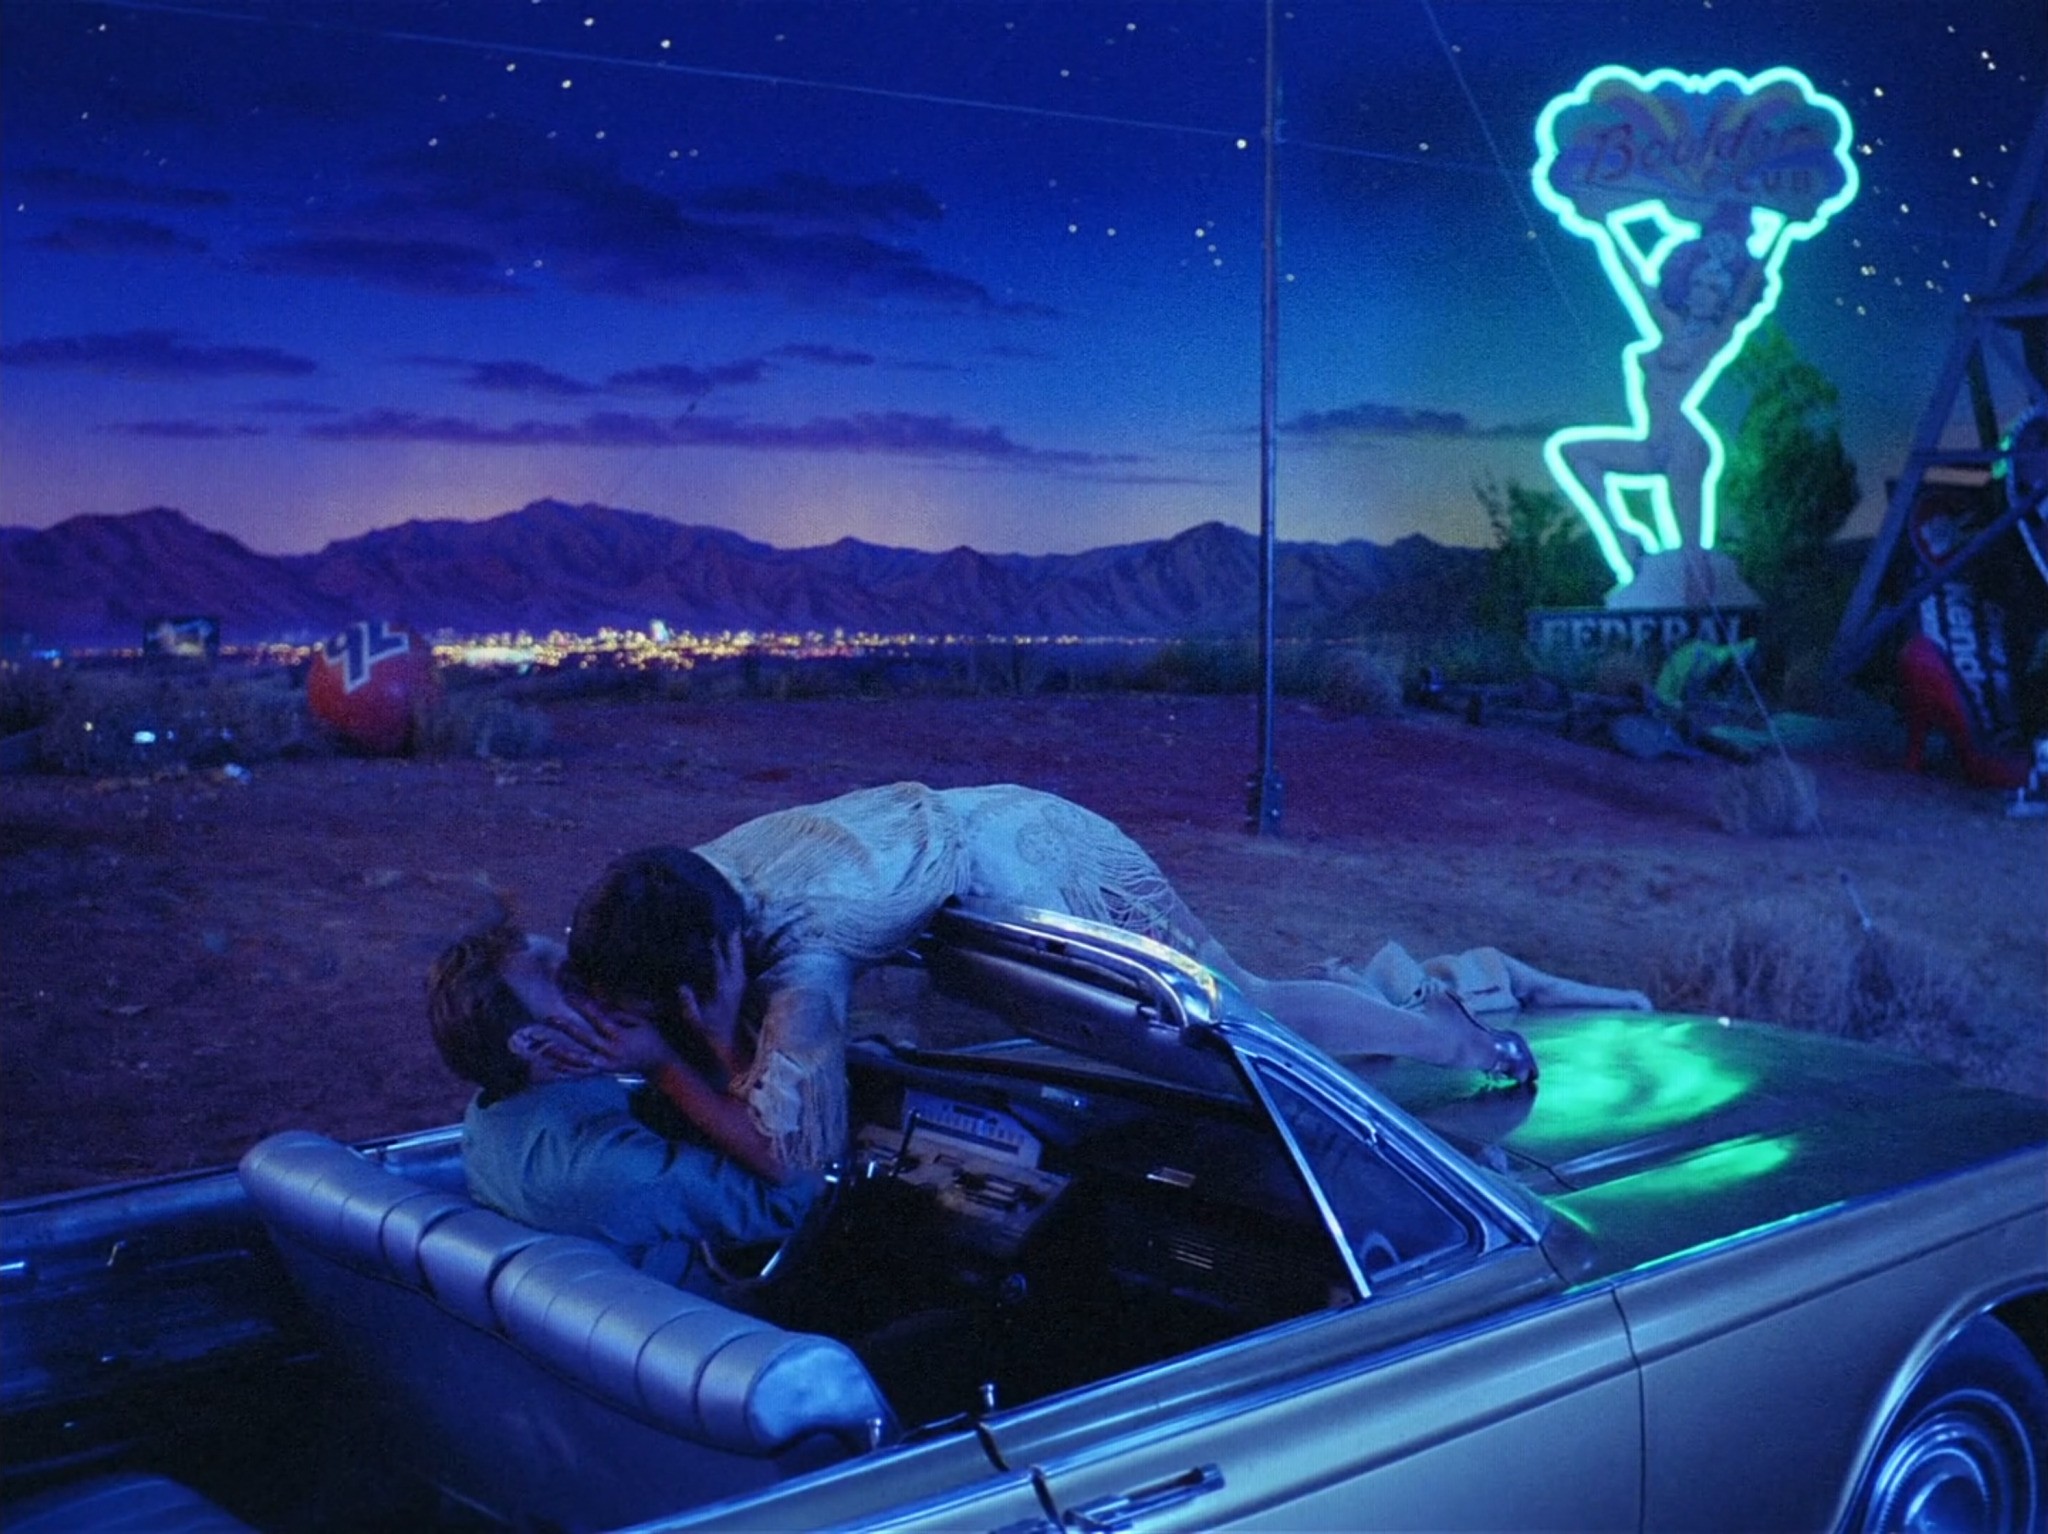 Las Vegas romantic musical from 1982 by Francis Ford Coppola - movie still of couple kissing in car by near neon showgirl sign